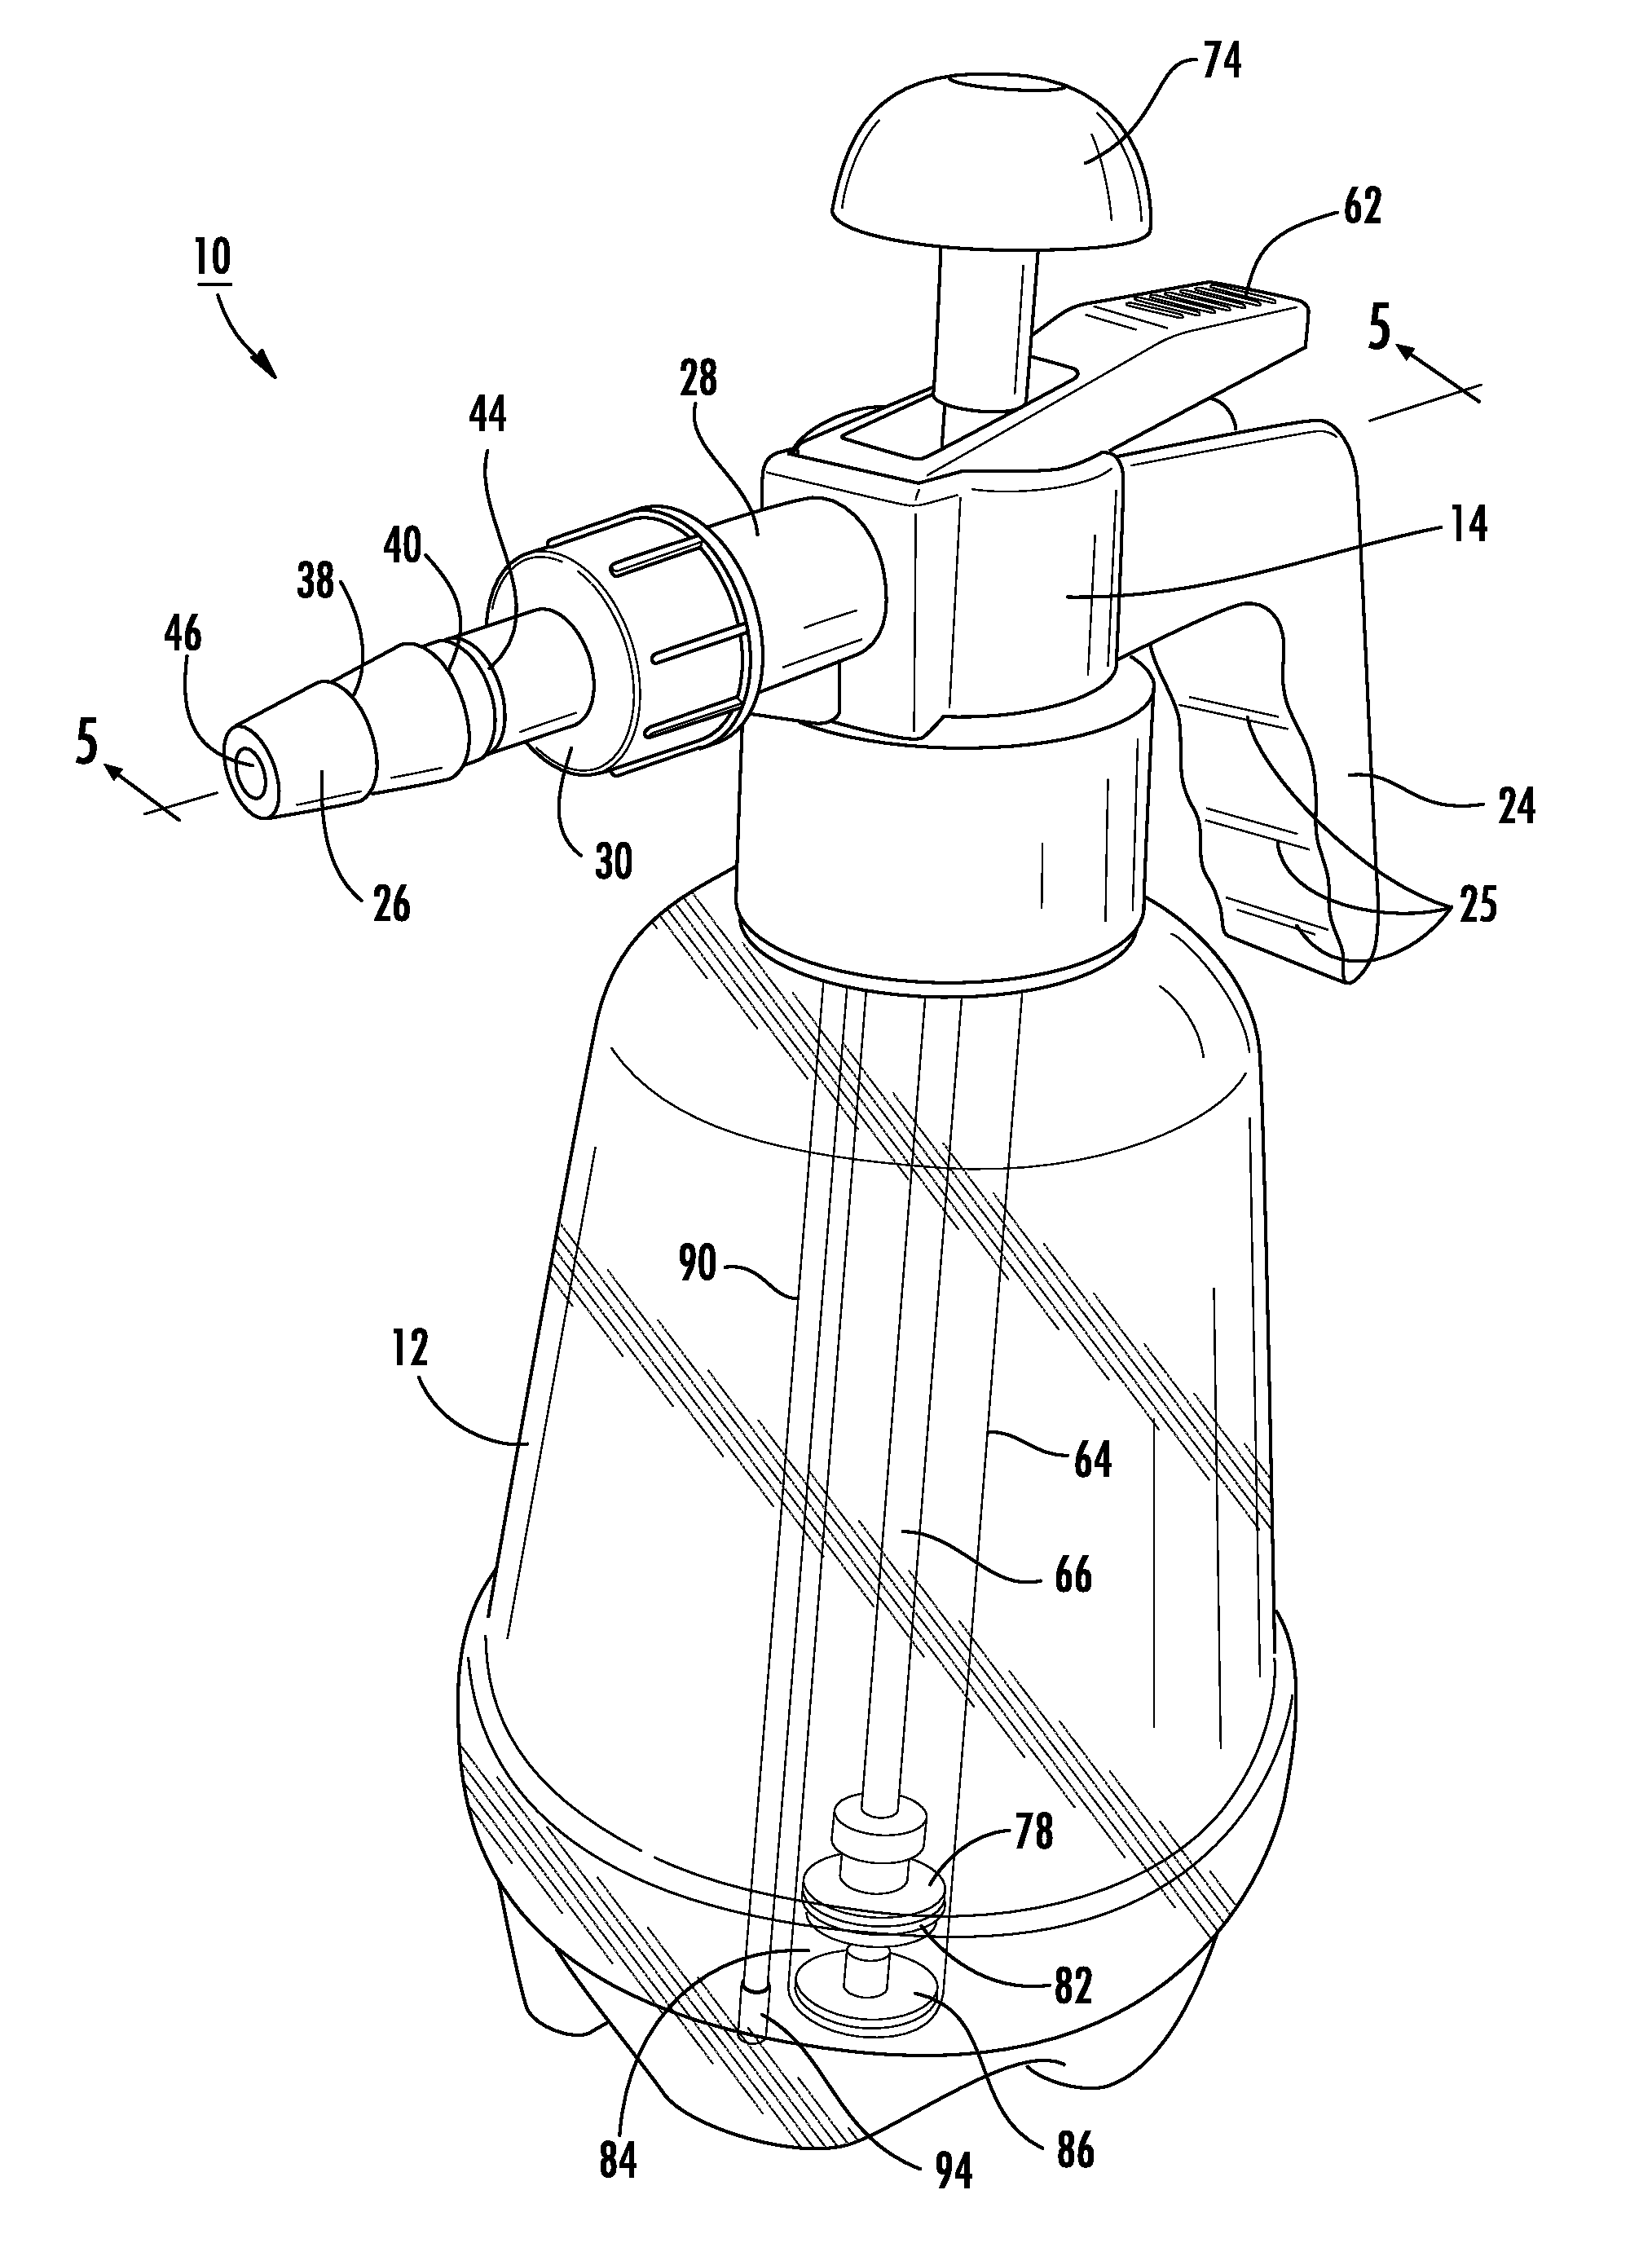 Portable Balloon Filling Device and Method